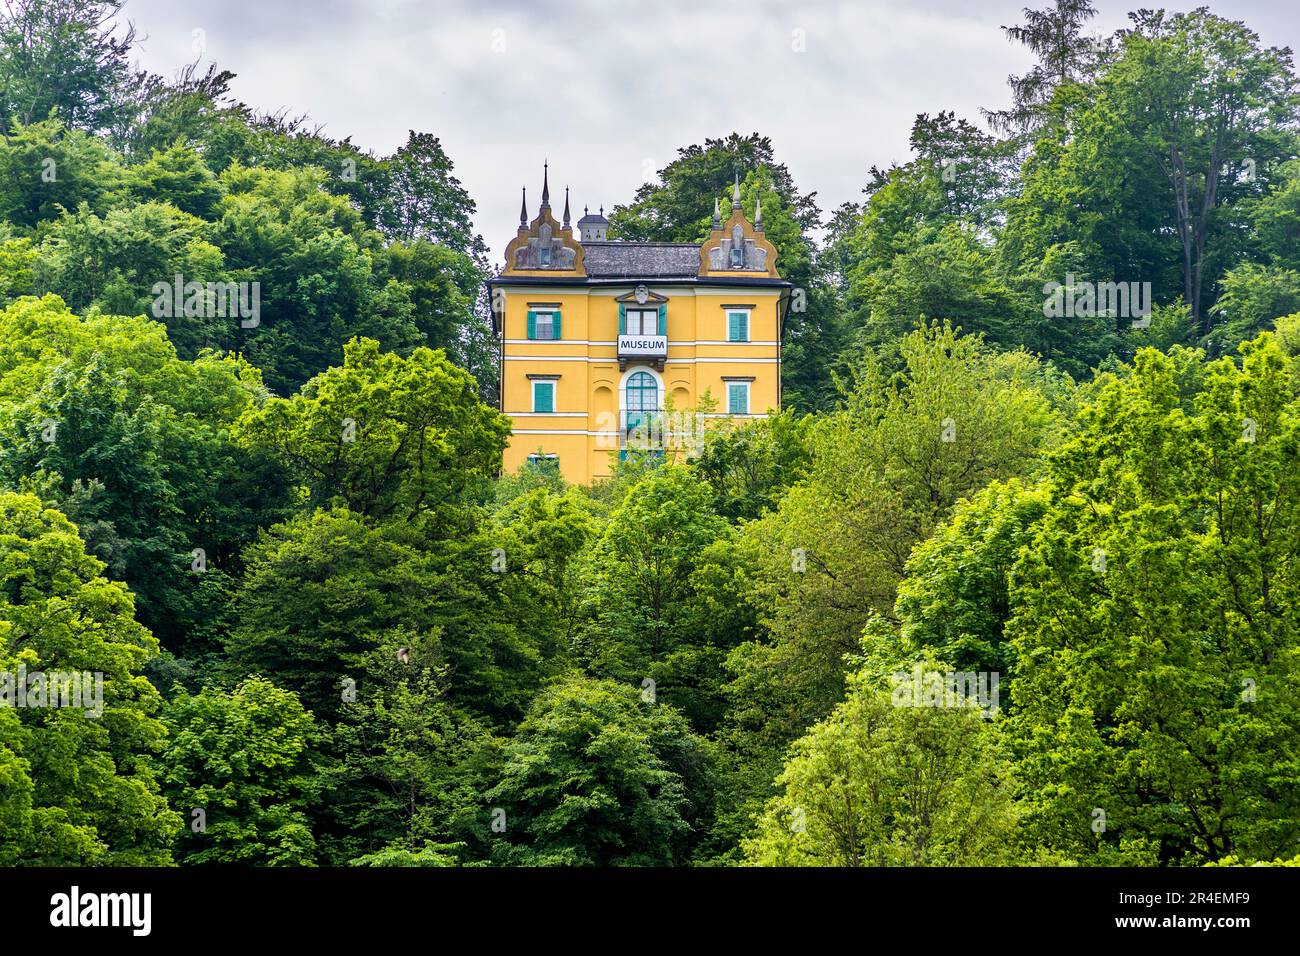 Folklore Museum at Hellbrunn Palace in Salzburg, Austria Stock Photo